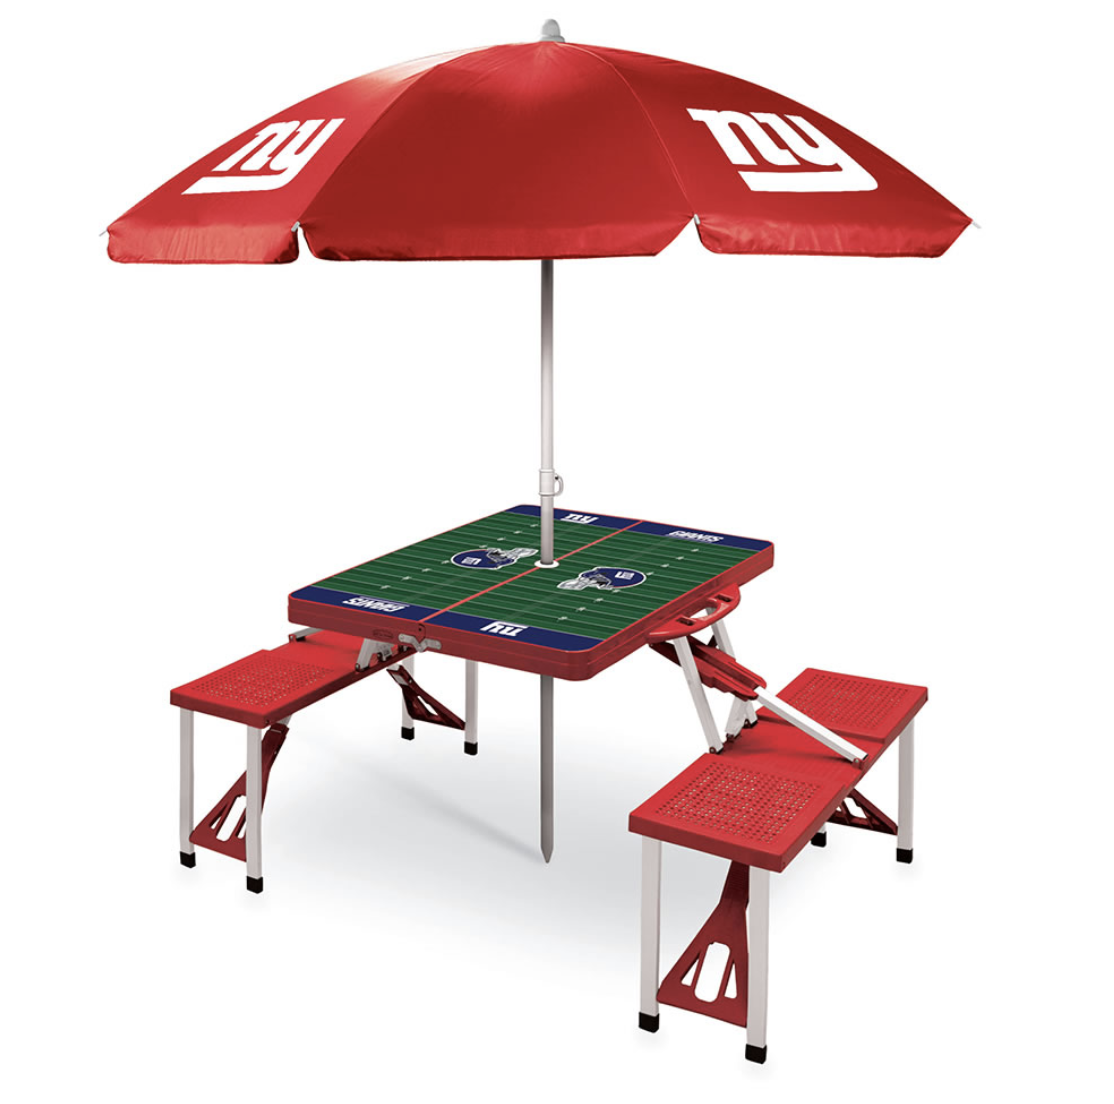 The NFL Tailgater's Table And Umbrella